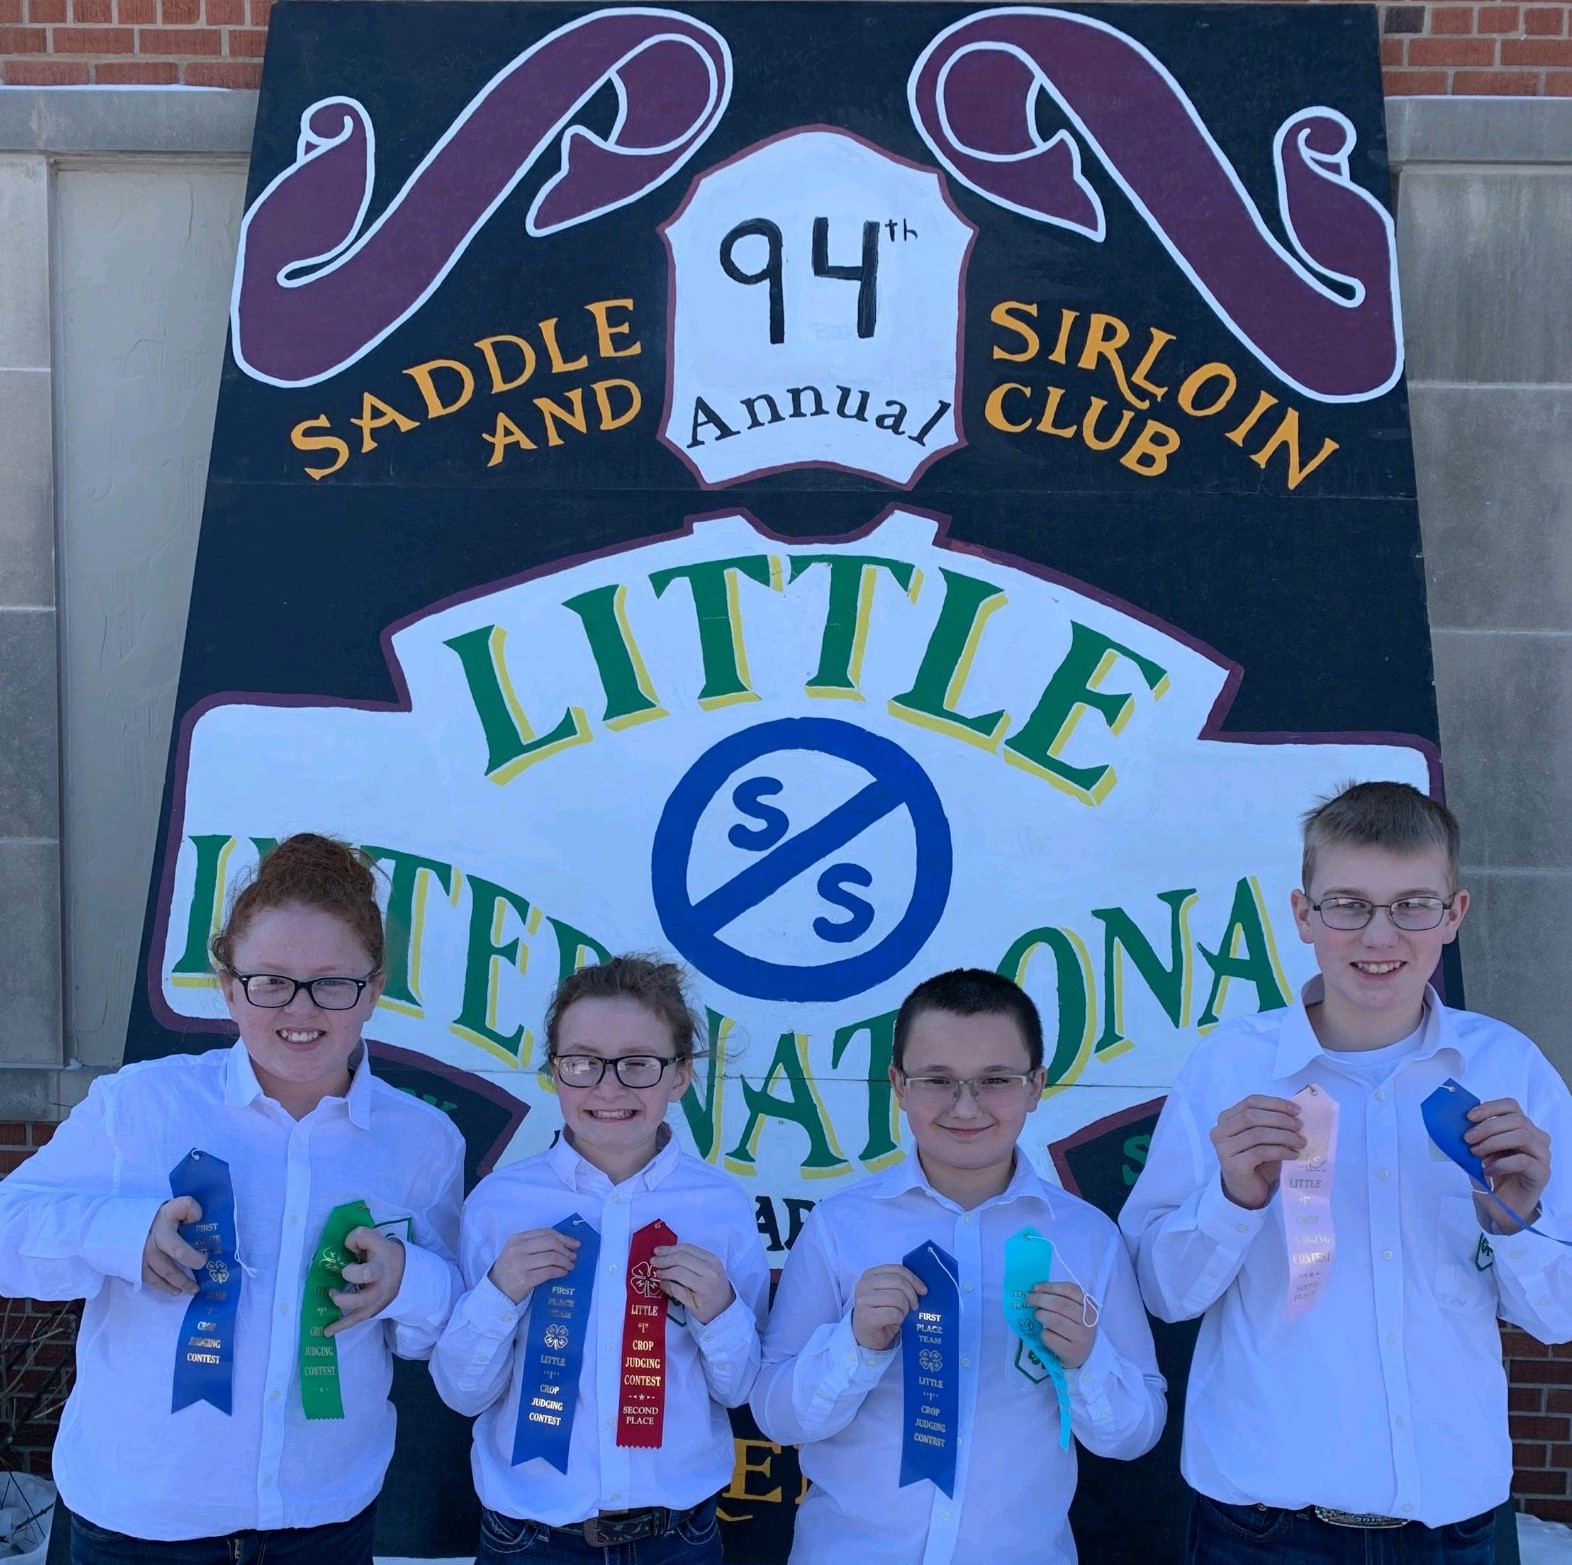 The Ward County team placed first in the junior division of the Little I 4-H crop judging contest. Pictured are, from left: Makayla White, Abby Finke, Daylon Yanish and Mark Schauer. (NDSU photo)